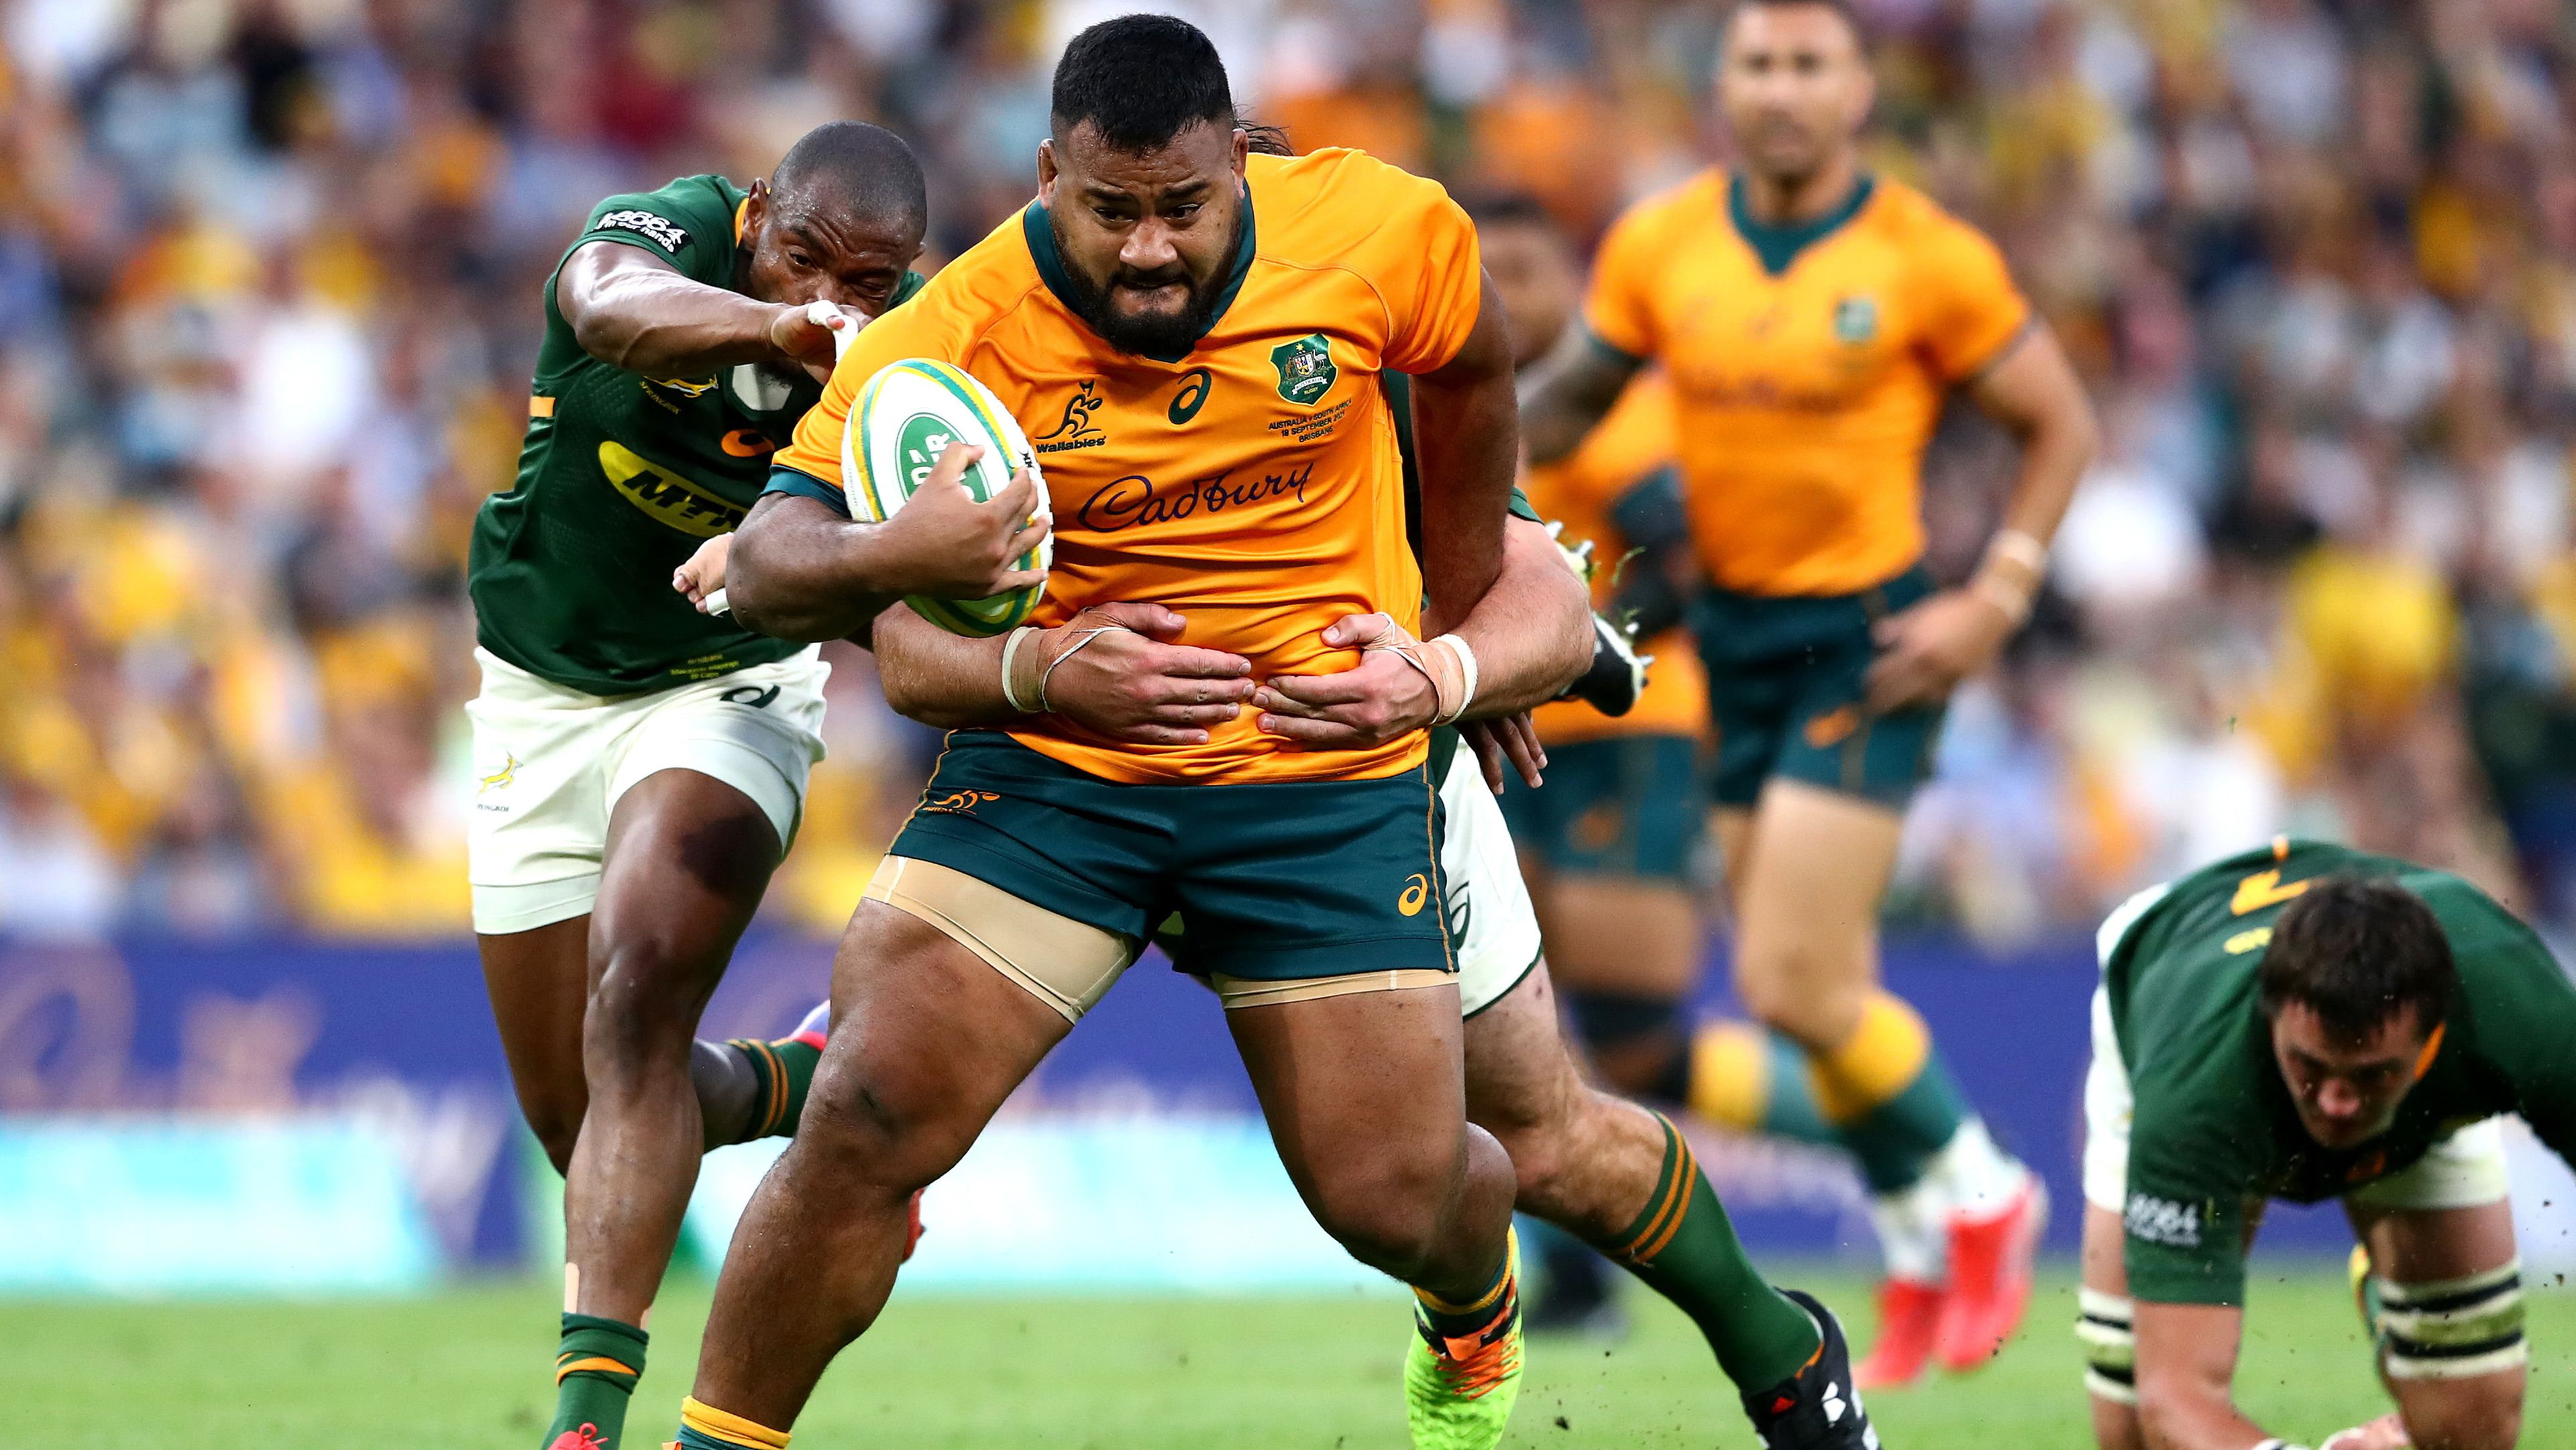 Wallabies prop Taniela Tupou on the charge against the Springboks.